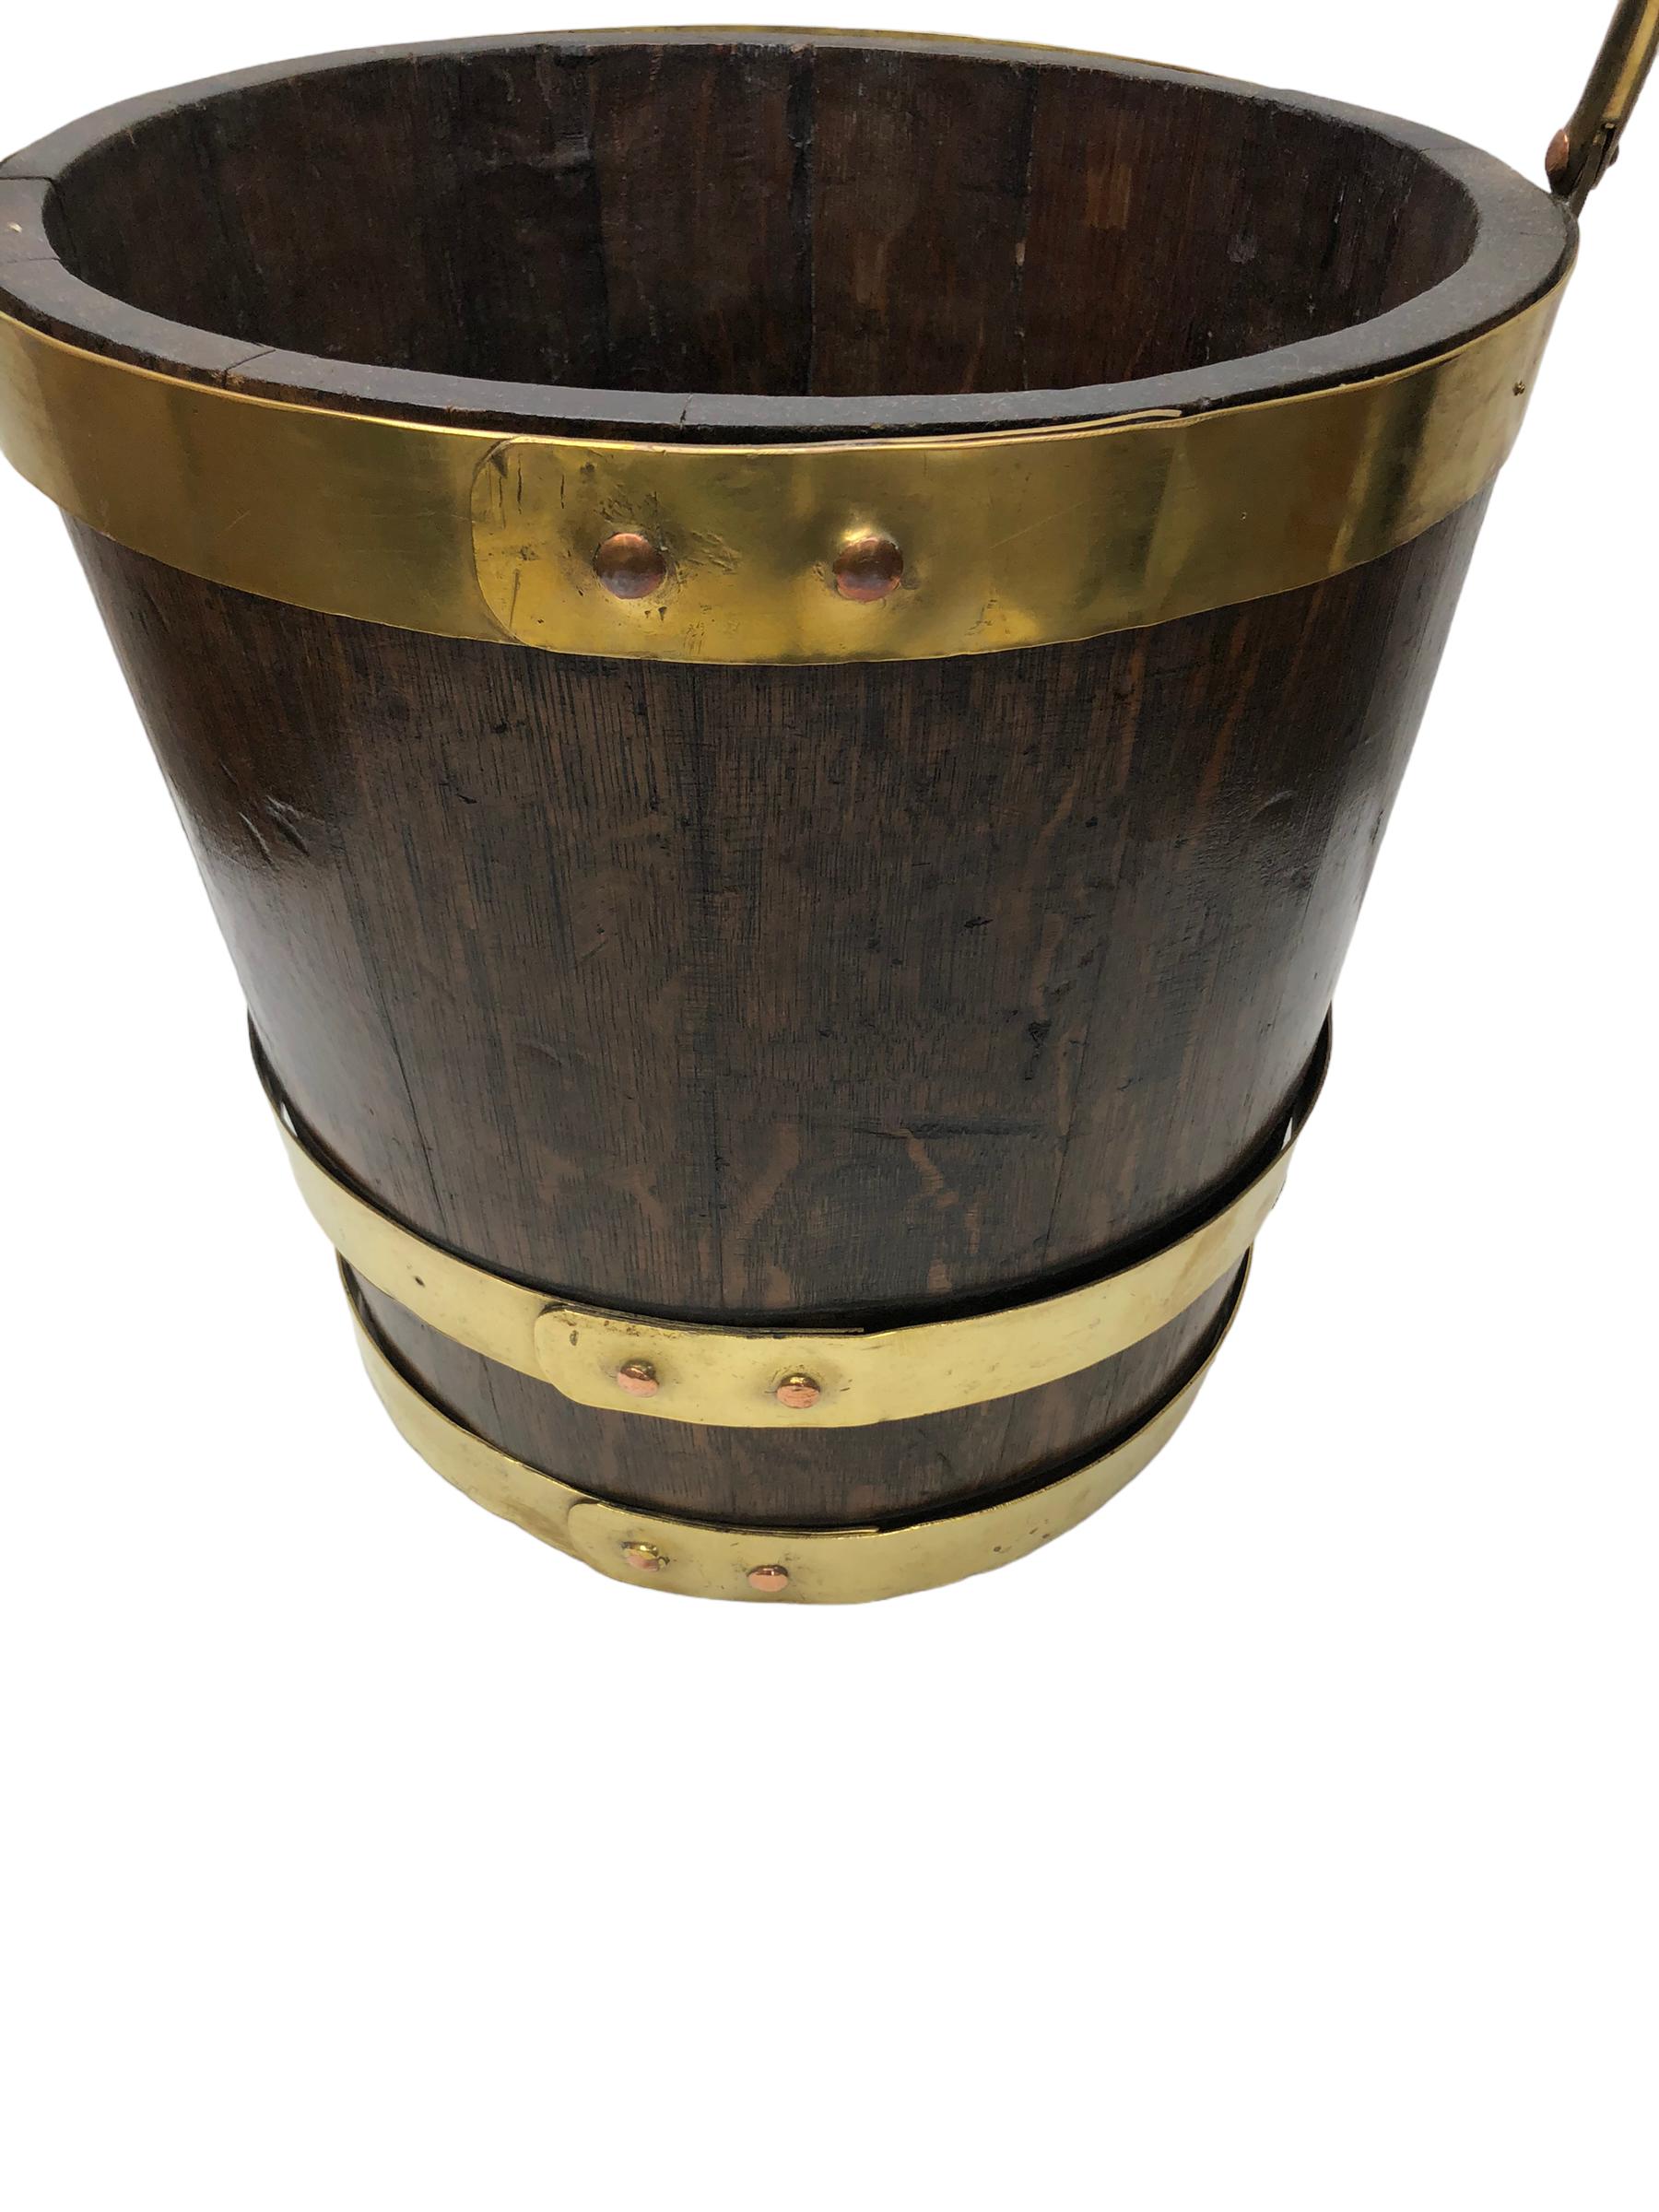 English Brass Bound Oak Peat Bucket.  Early 20th Century oak bucket bound by three brass bands. Heavy brass handle pivoting handle. Coopered and staved construction. Well patinated. Originally used to store turf or peat, now used as a kindling